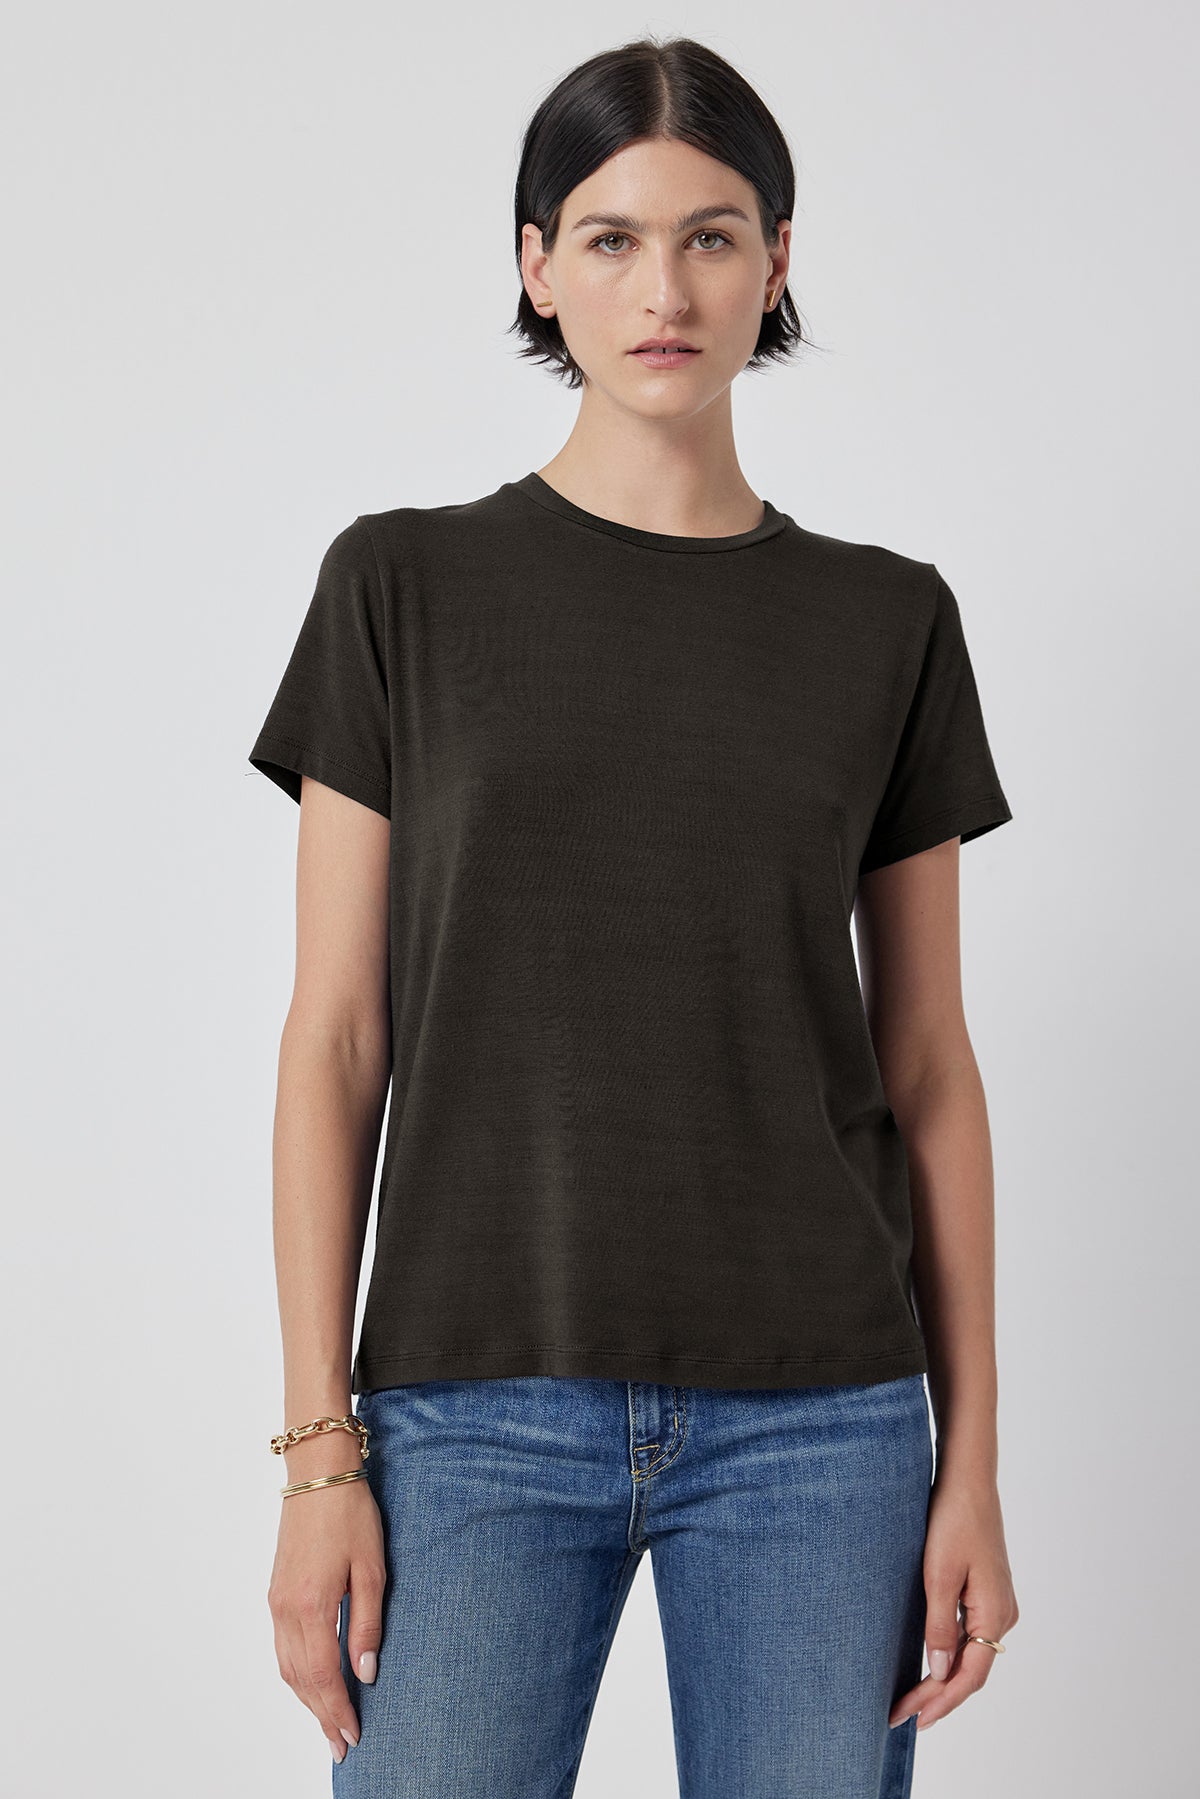 A woman in a Solana Tee by Velvet by Jenny Graham and blue jeans standing against a white background.-36290523529409